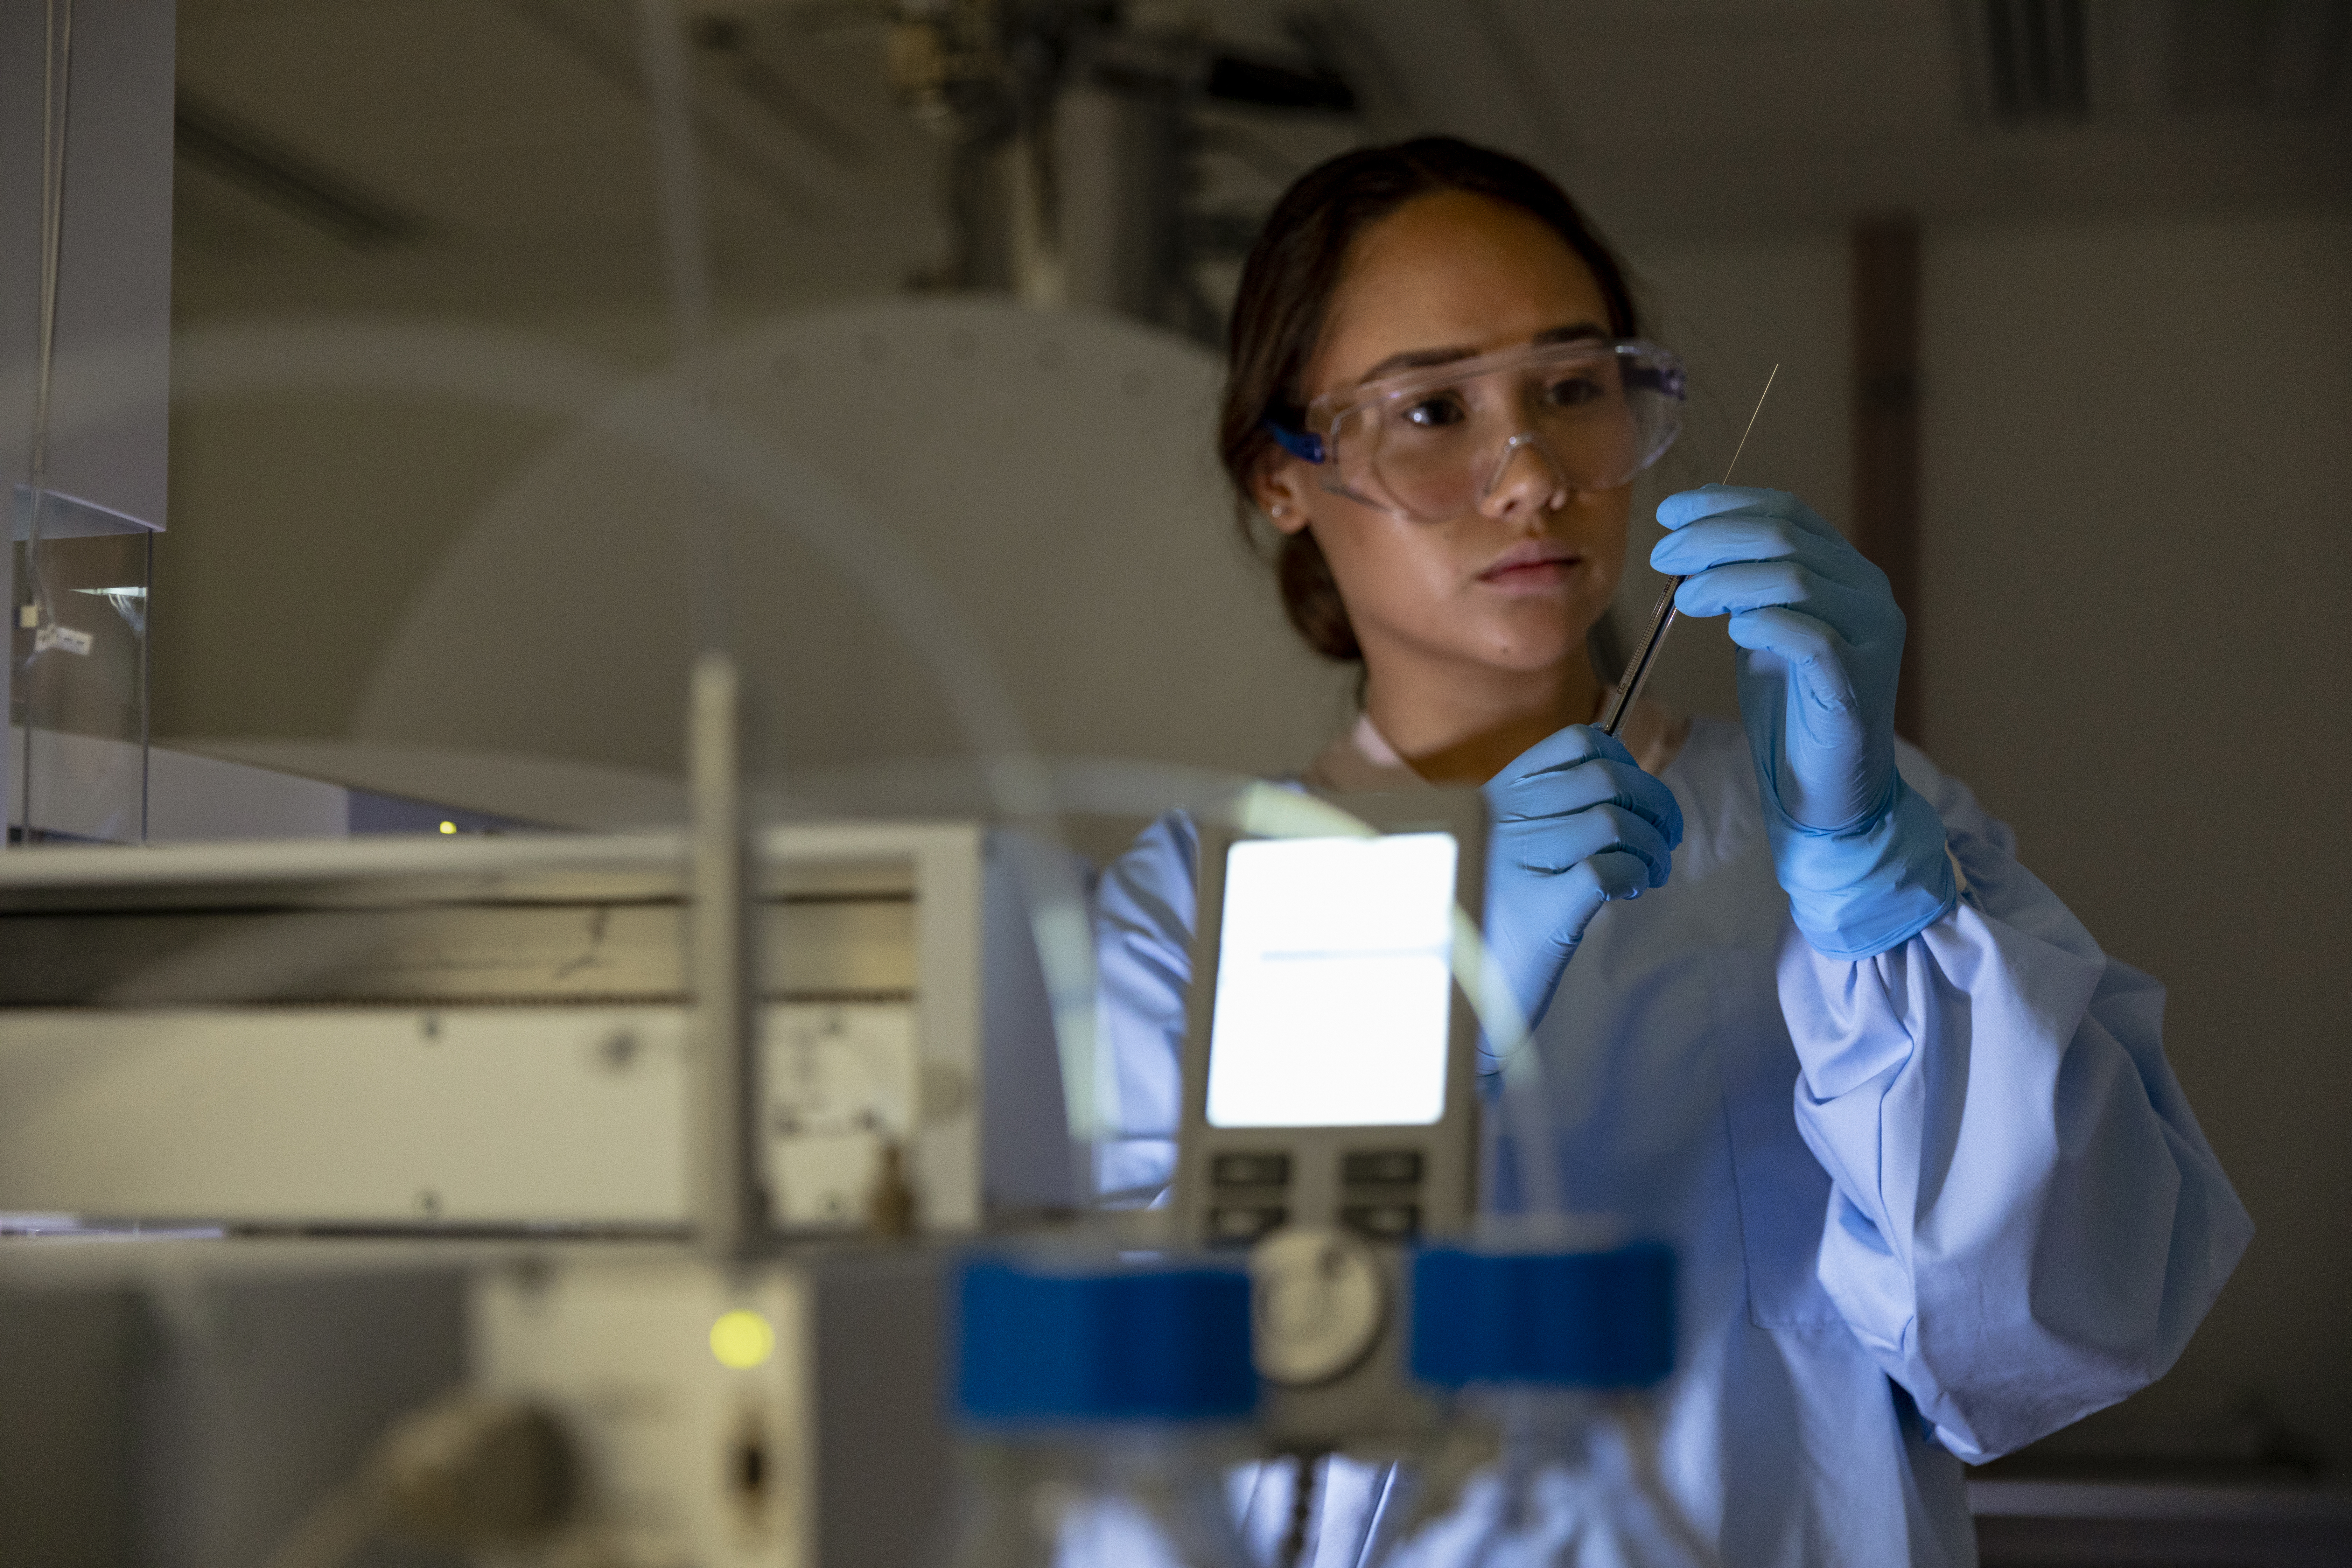 A forensics intern looks at lab test results